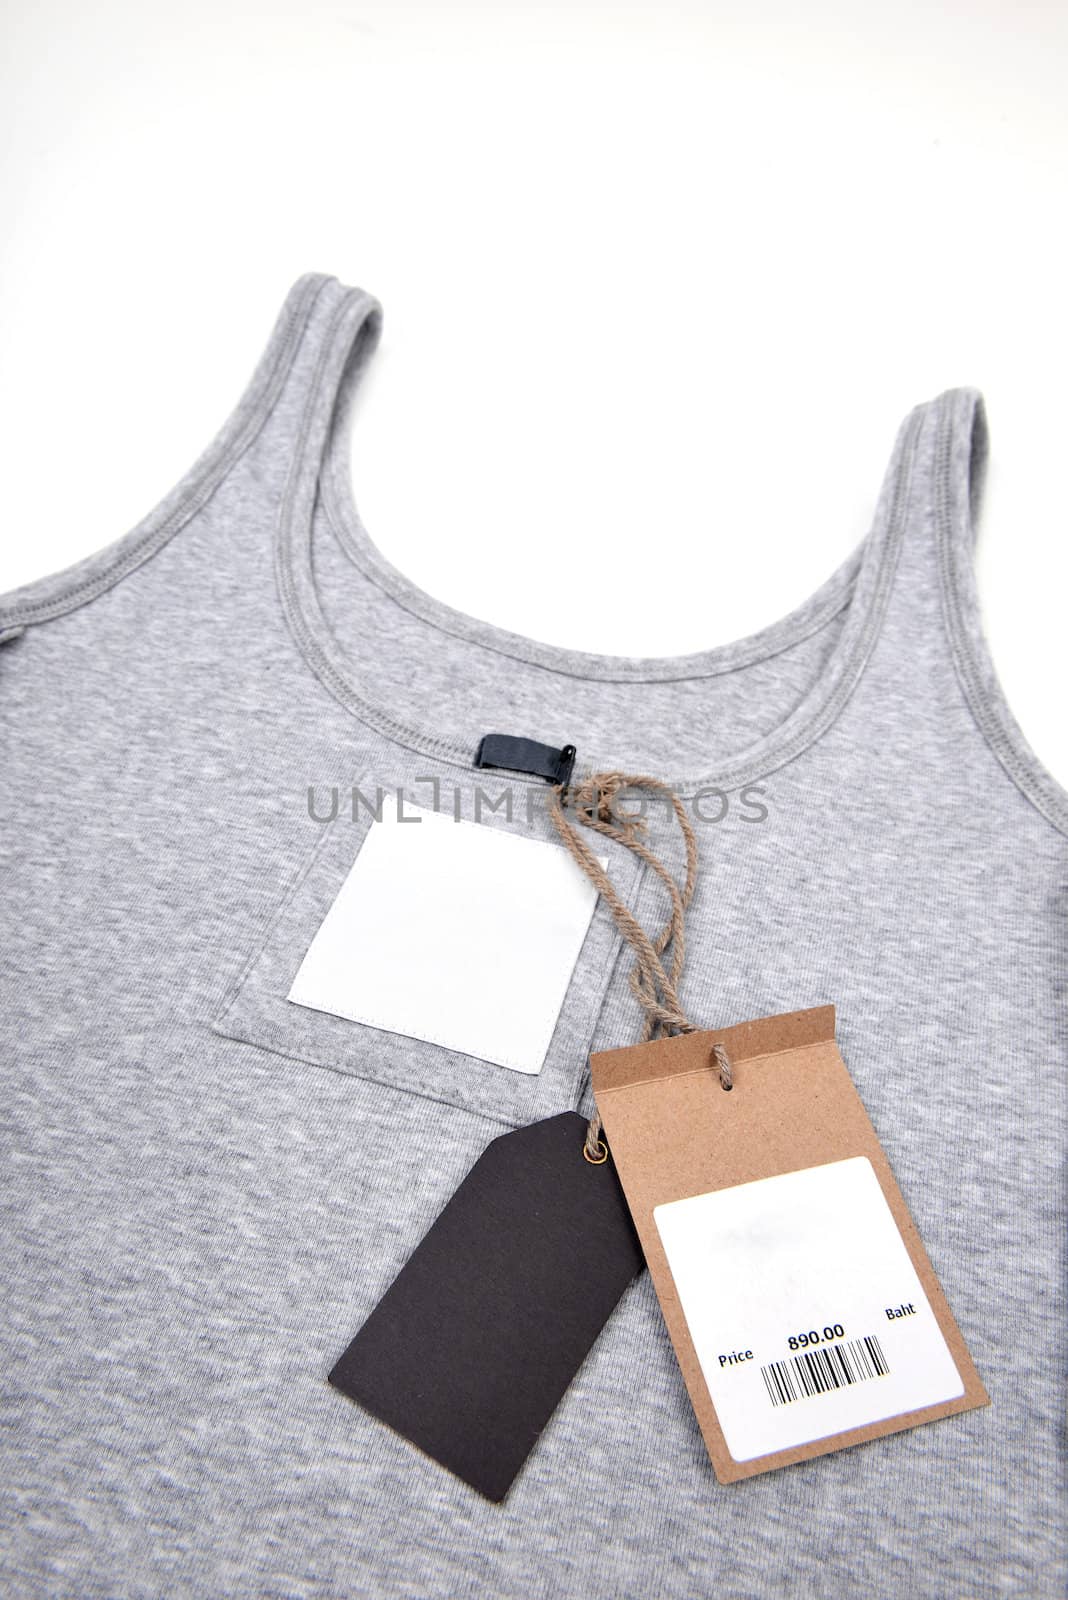 undershirt with price tag by anankkml